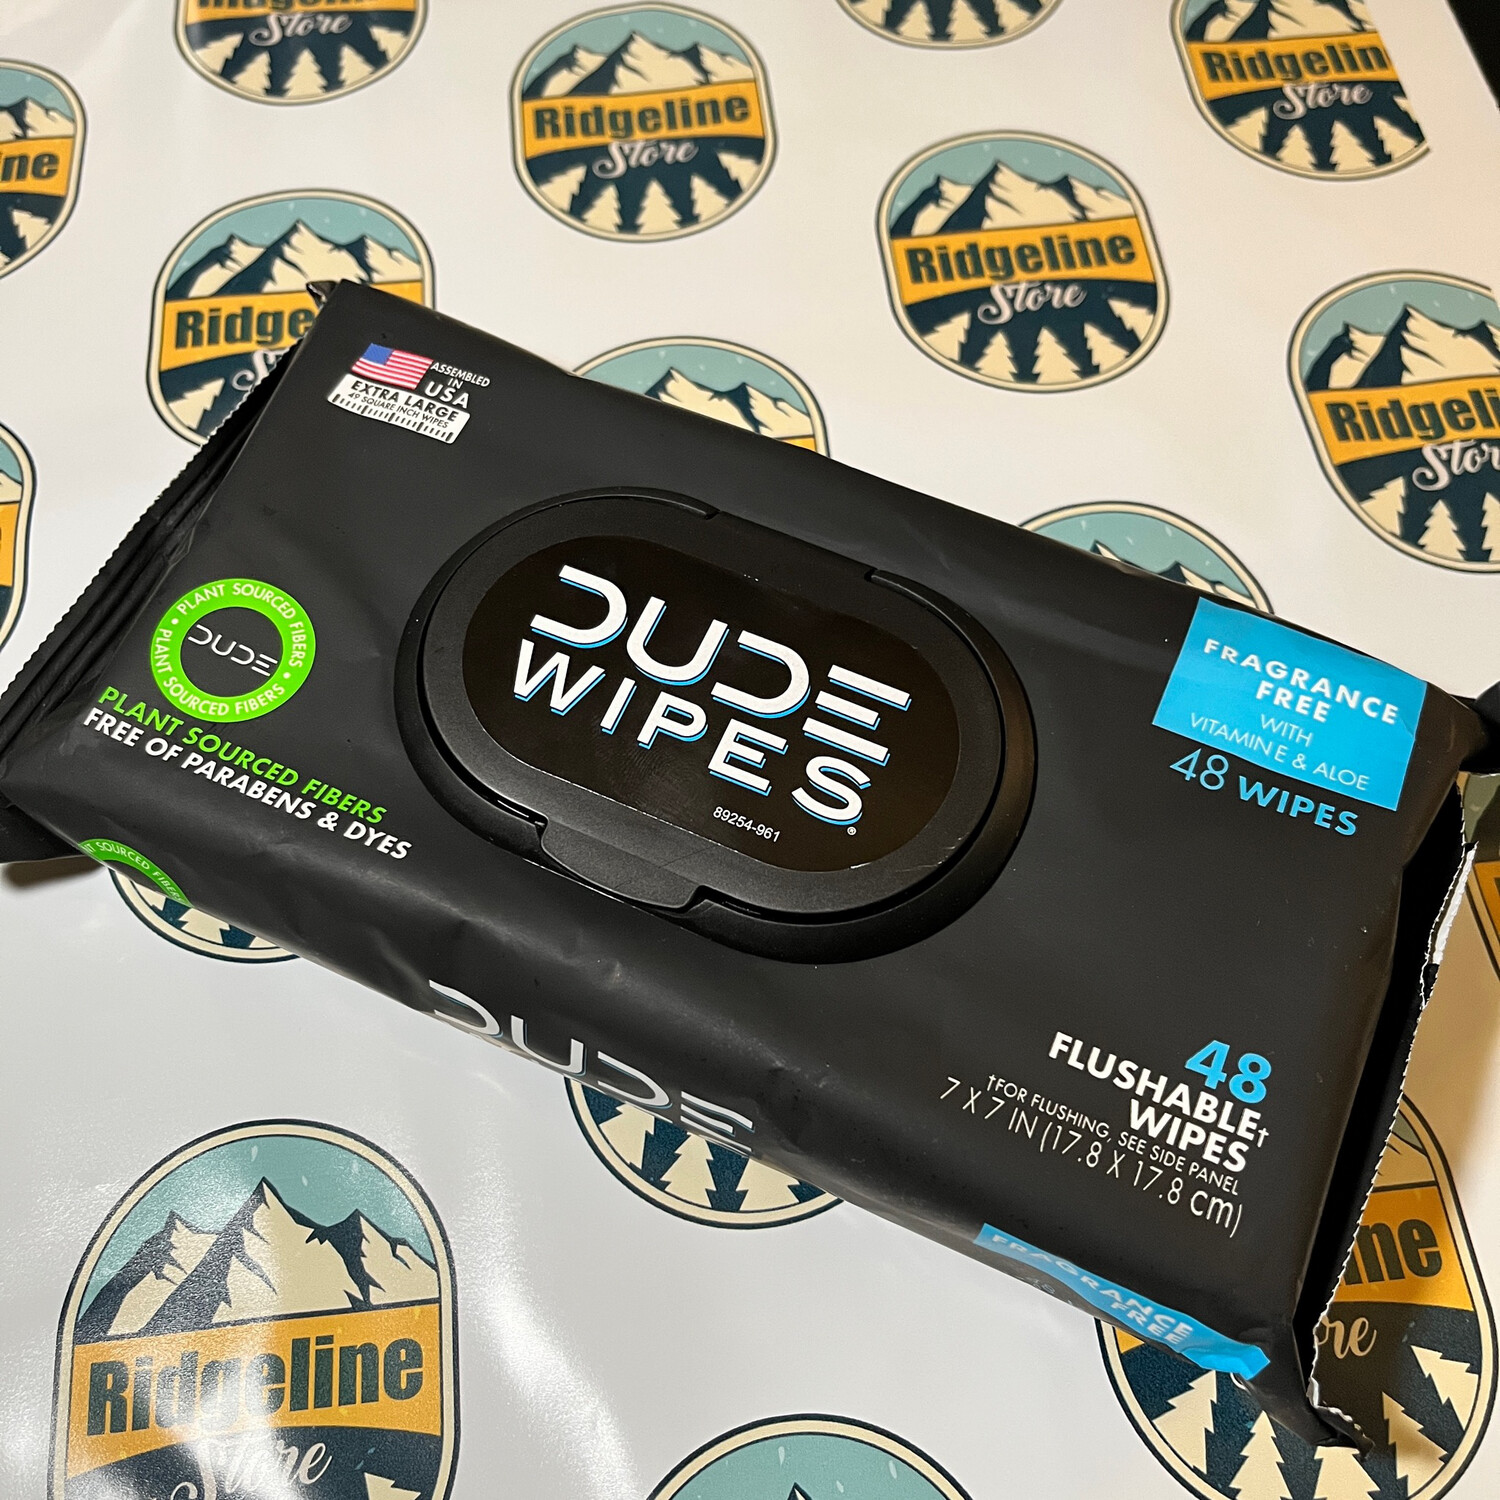 DUDE WIPES - CampingRandy's Favorite Butt Wipes